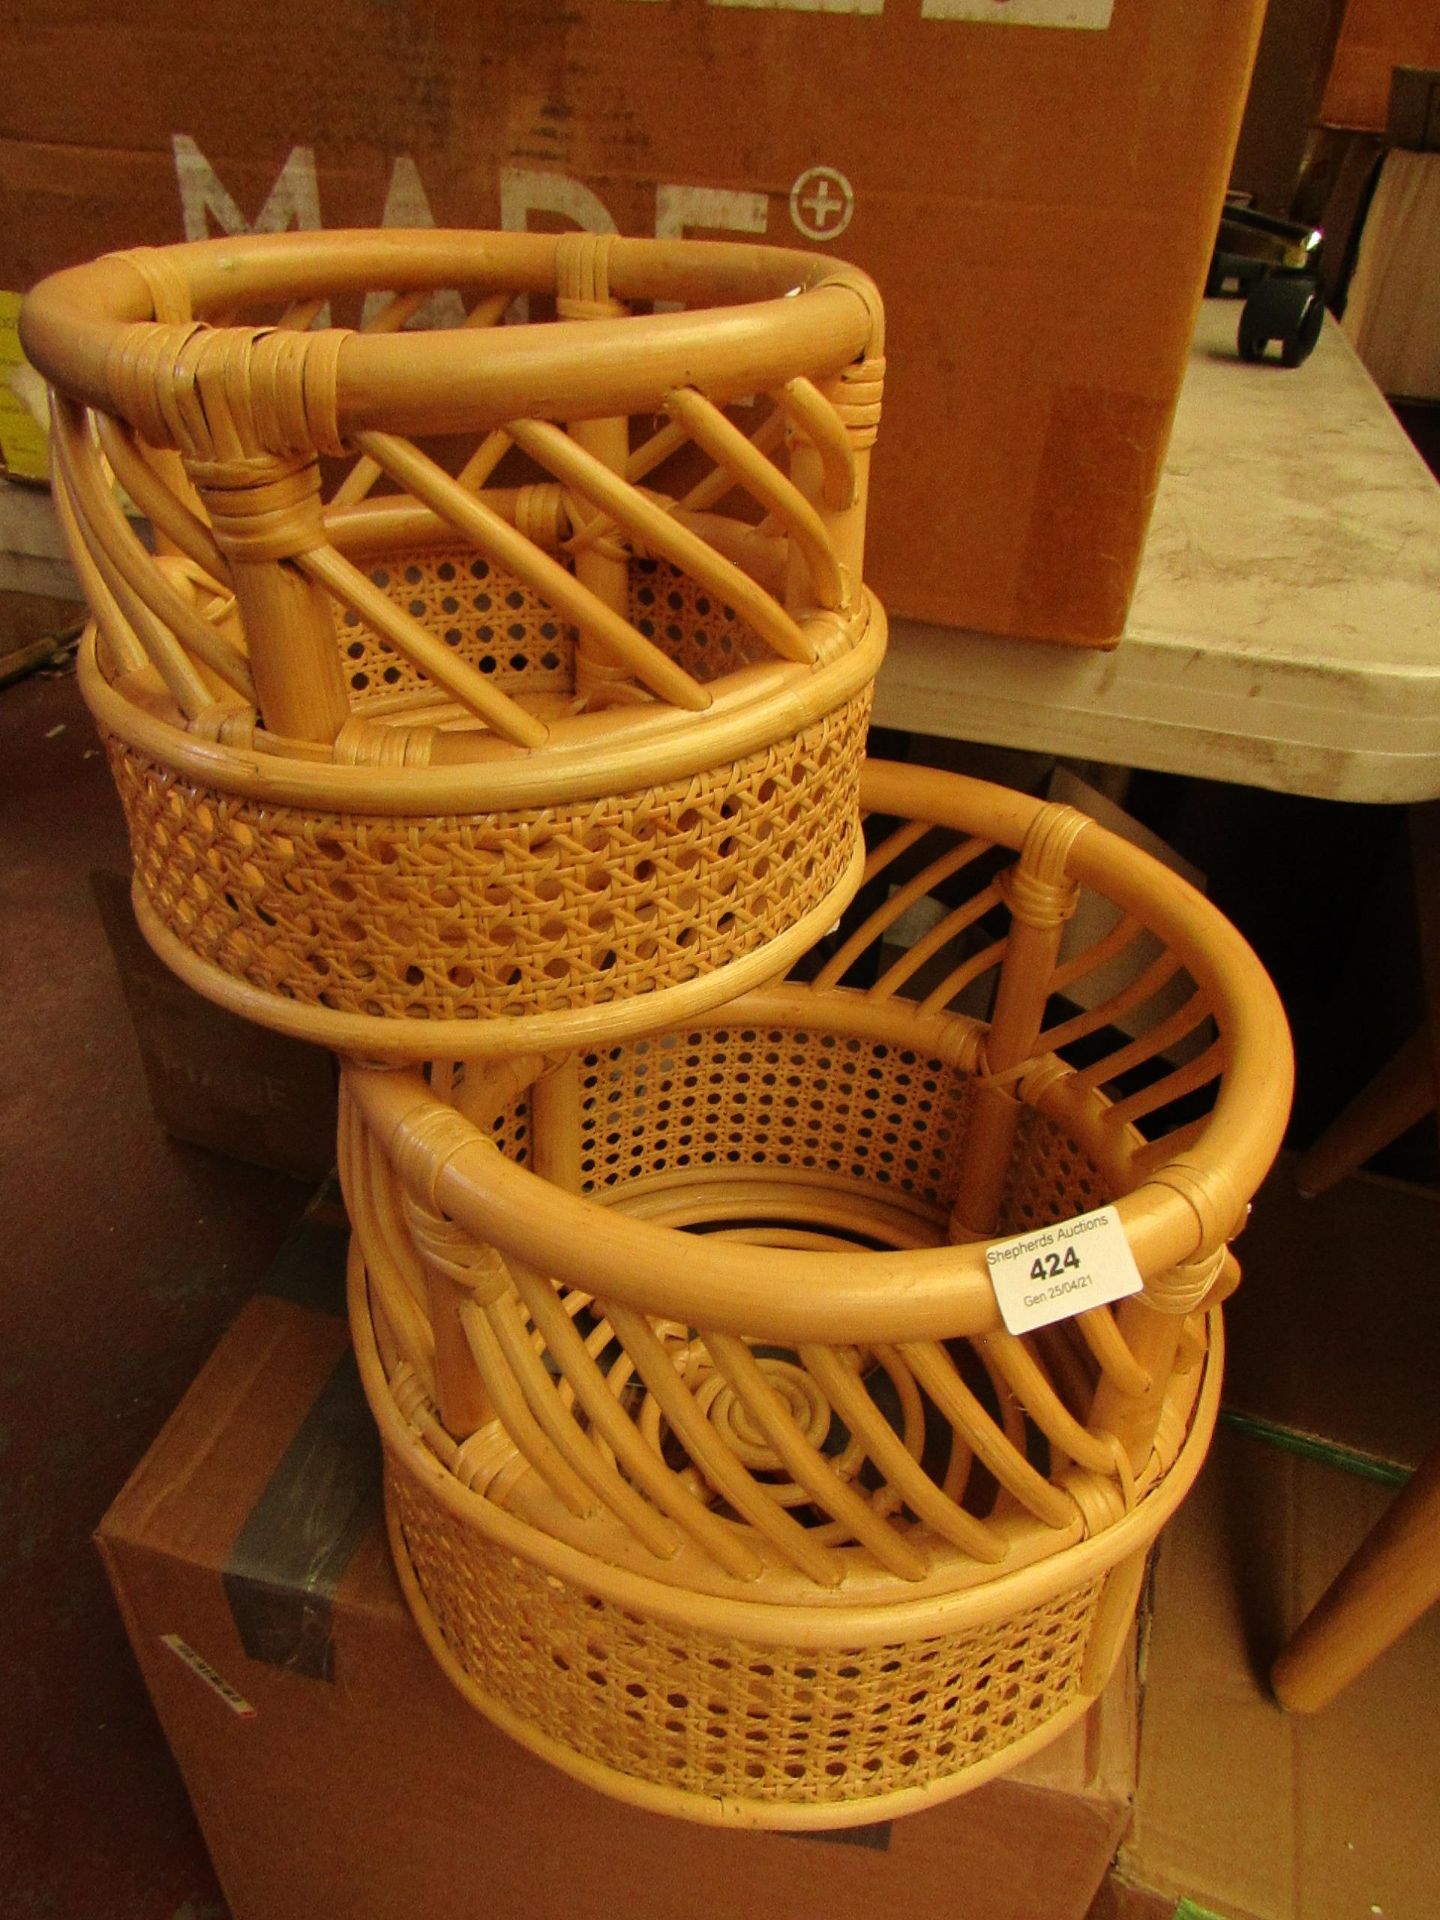 | 1X | MADE.COM SET OF 2 WICKER BASKETS | LOOKS UNUSED (NO GUARANTEE) AND BOXED | RRP - |